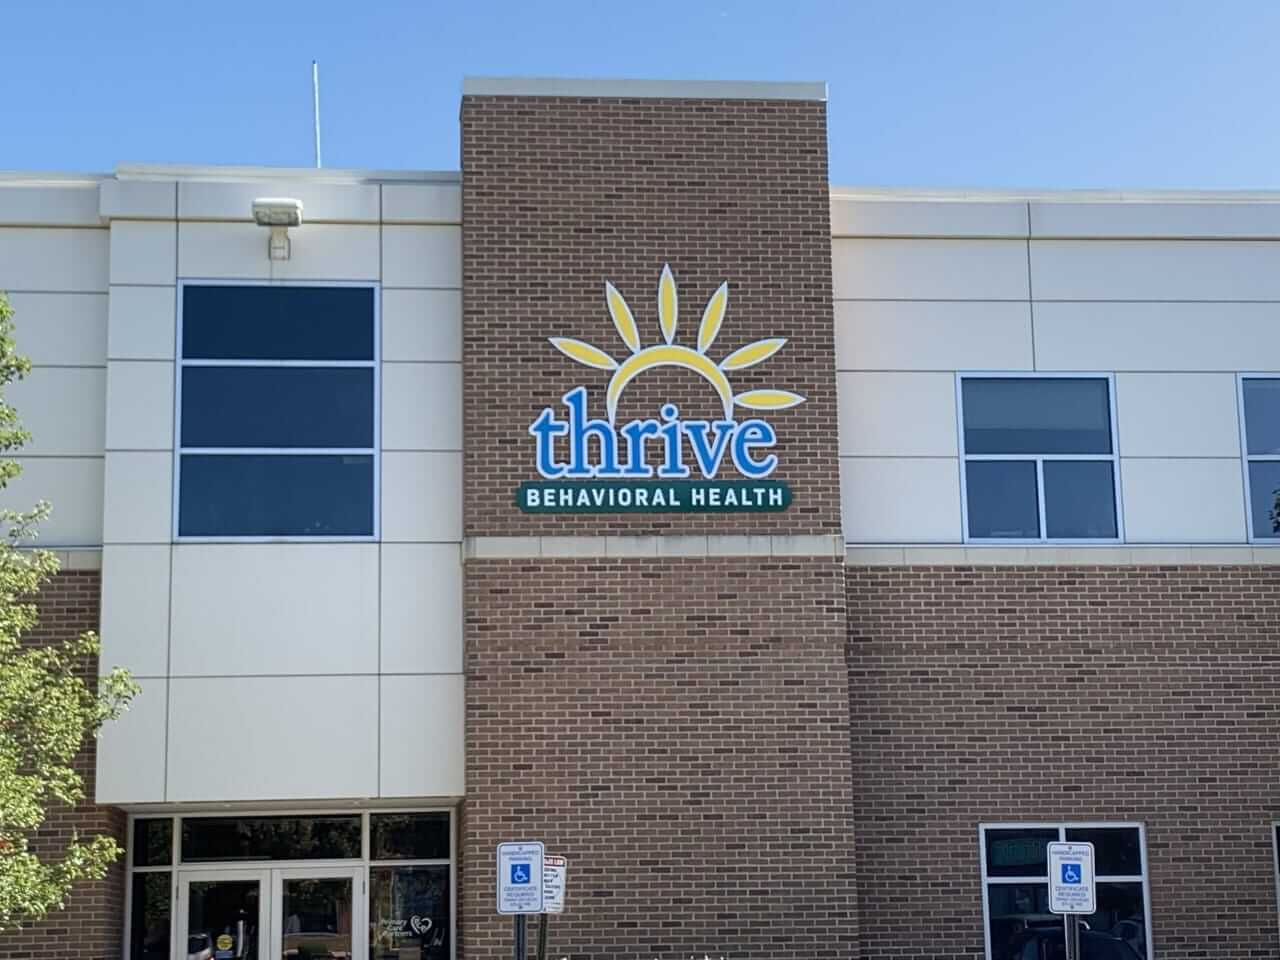 [CREDIT: Thrive] Thrive Behavioral Health offers telehealth mental health services, which are increasingly in demand during the COVID-19 pandemic.